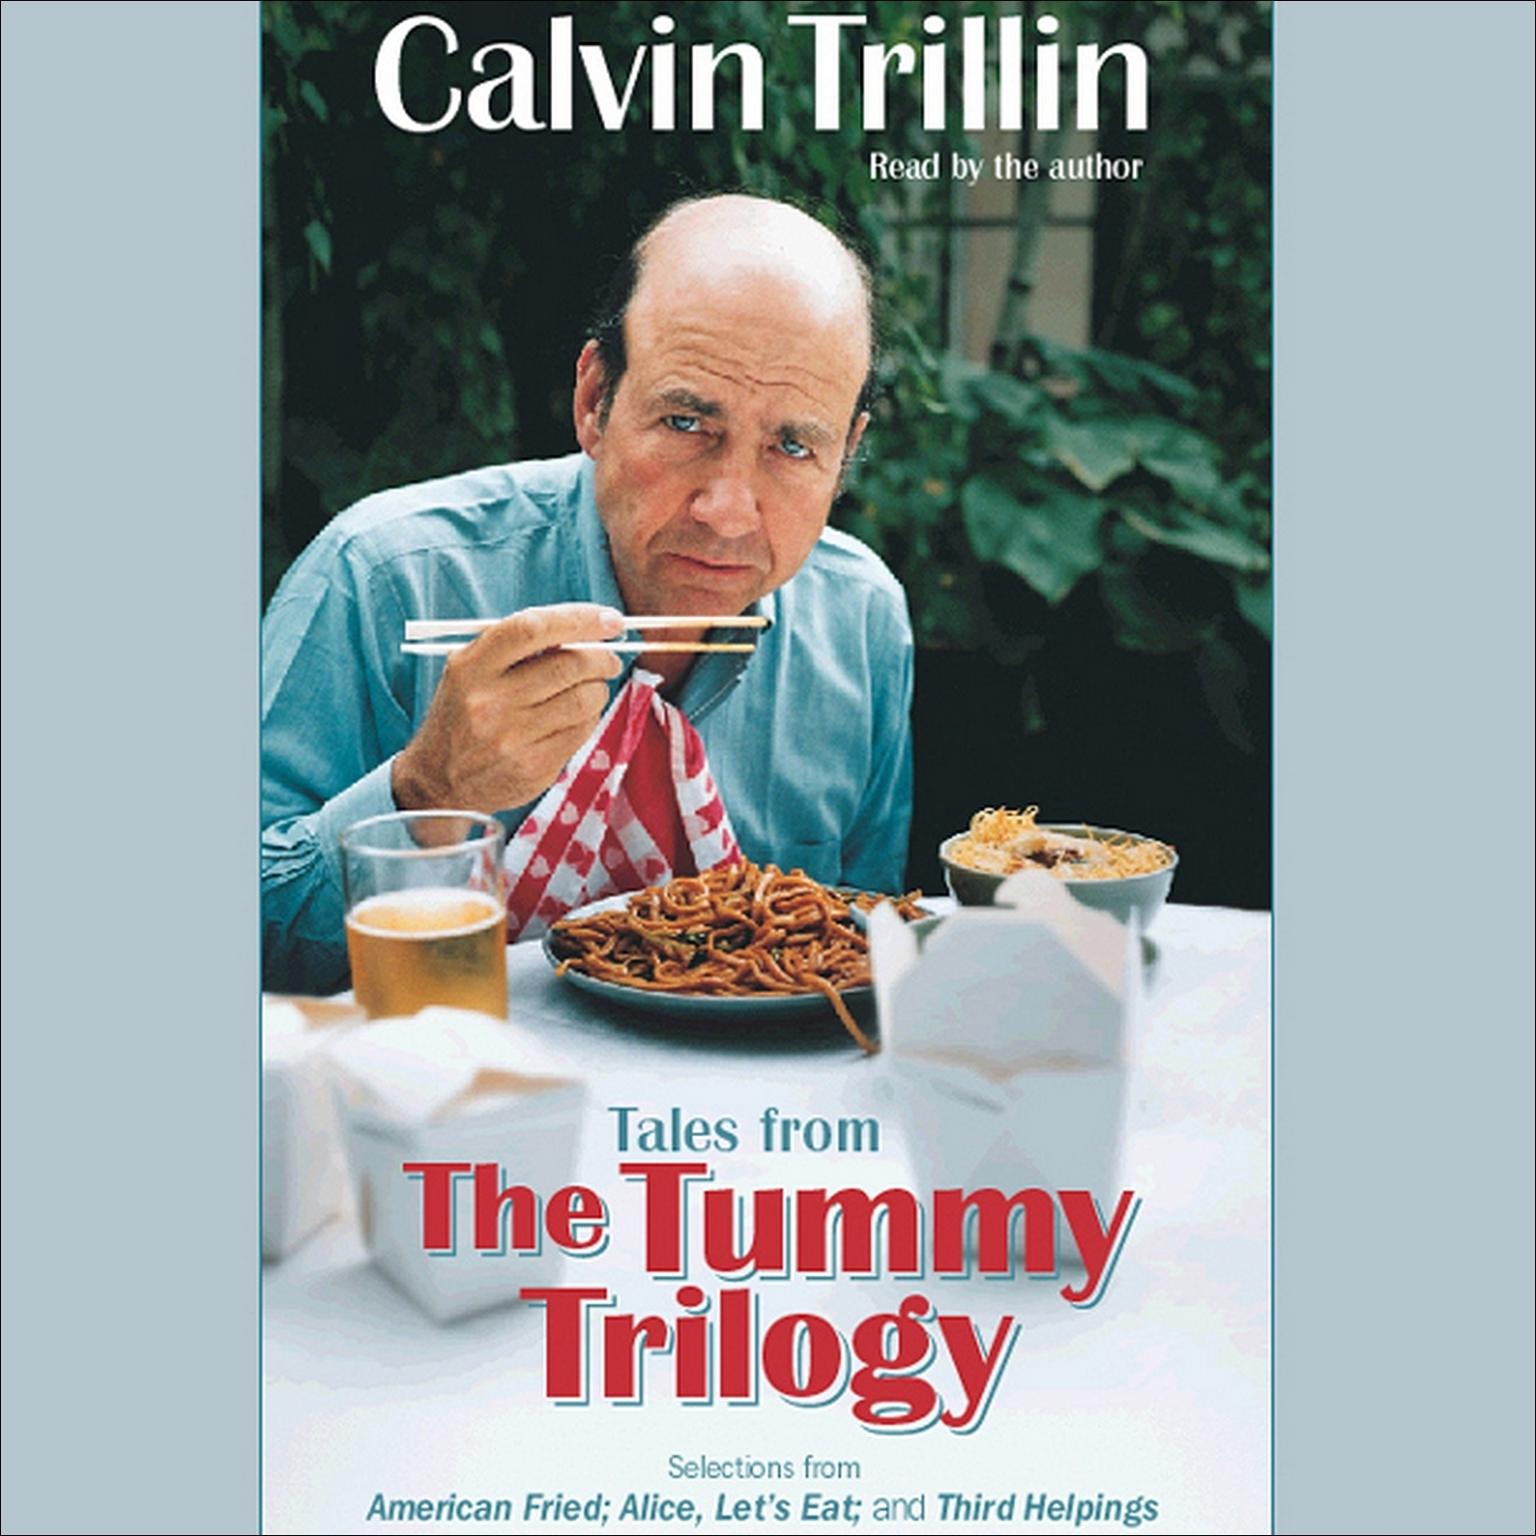 Tales from the Tummy Trilogy (Abridged) Audiobook, by Calvin Trillin